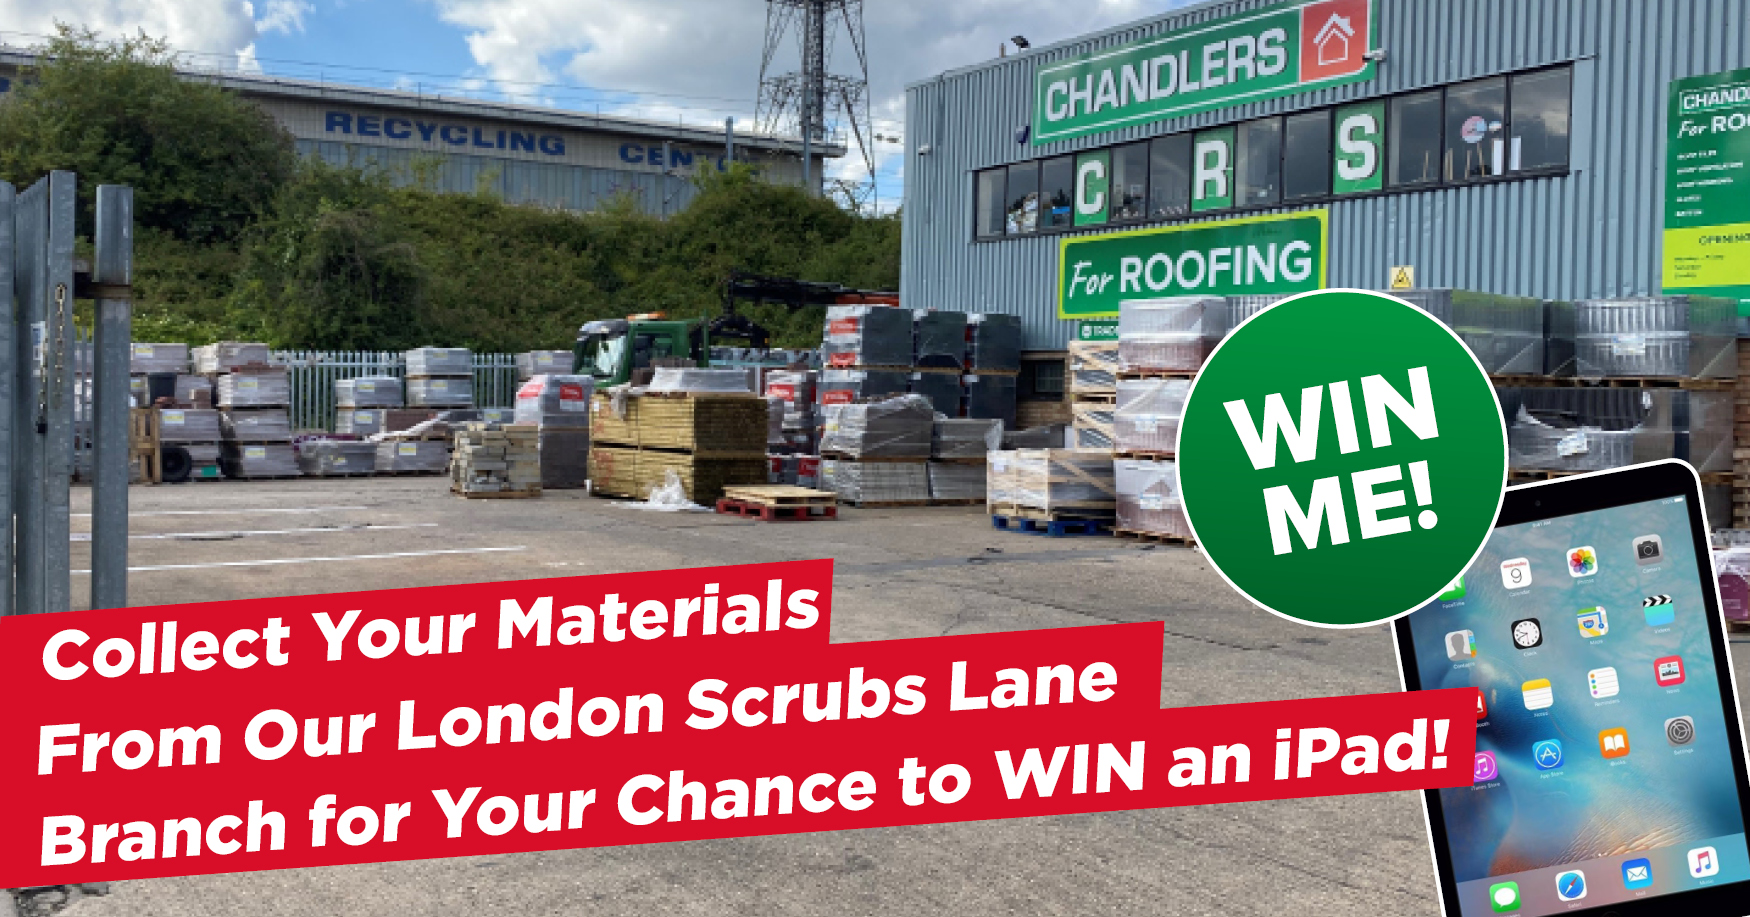 Fast Track Collection Service and Your Chance to Win an iPad at our London Scrubs Lane Branch